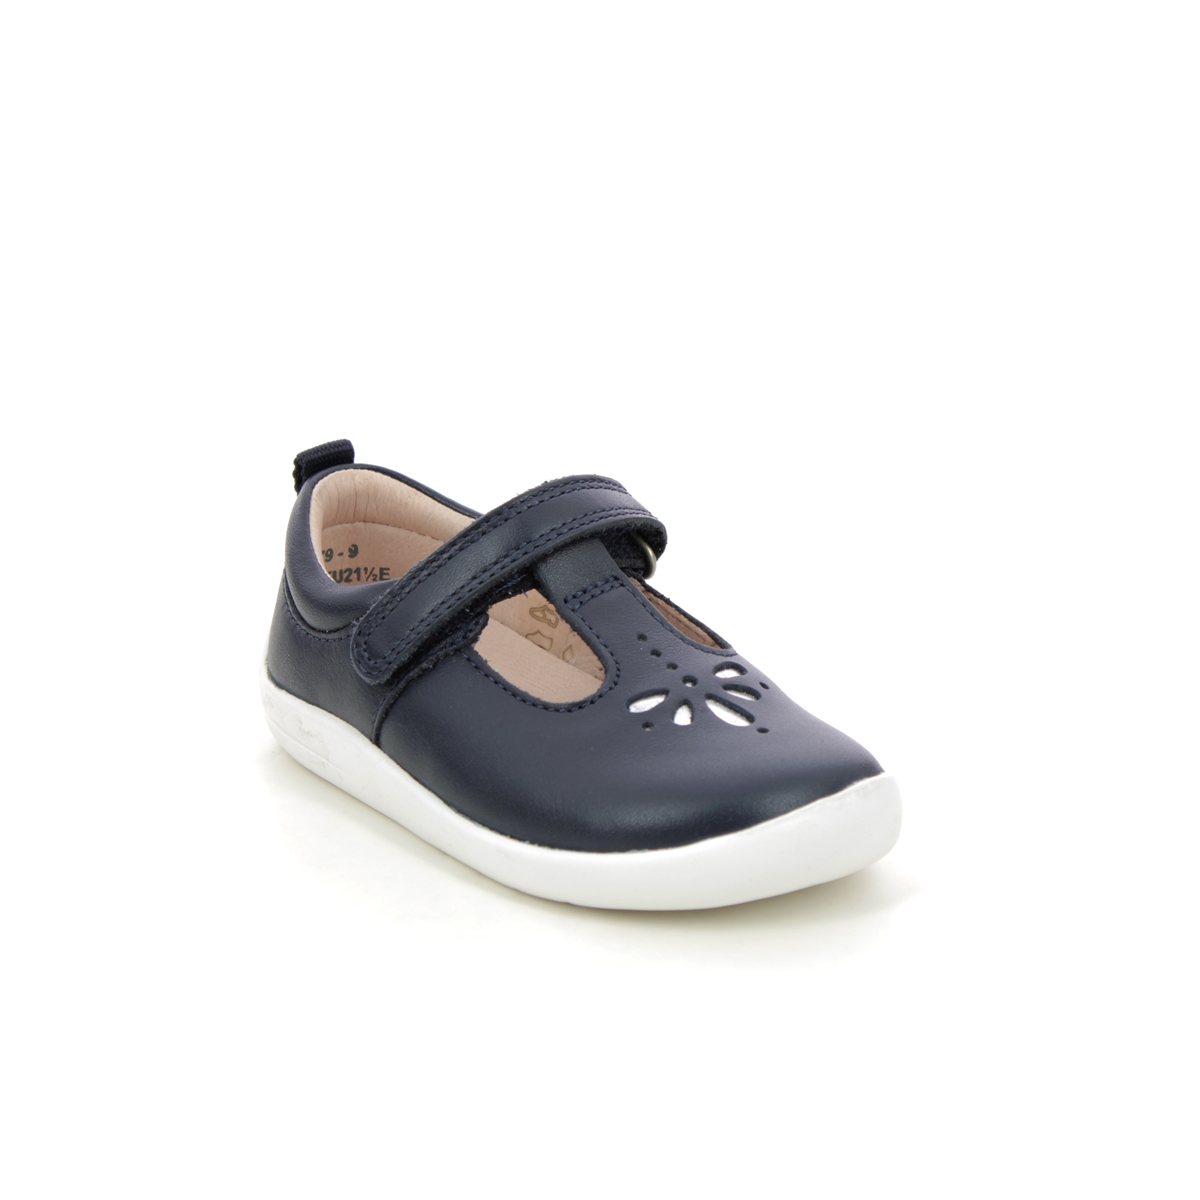 Start Rite - Puzzle In Navy Leather 0779-95E In Size 7 In Plain Navy Leather 1St Shoes & Prewalkers  In Navy Leather